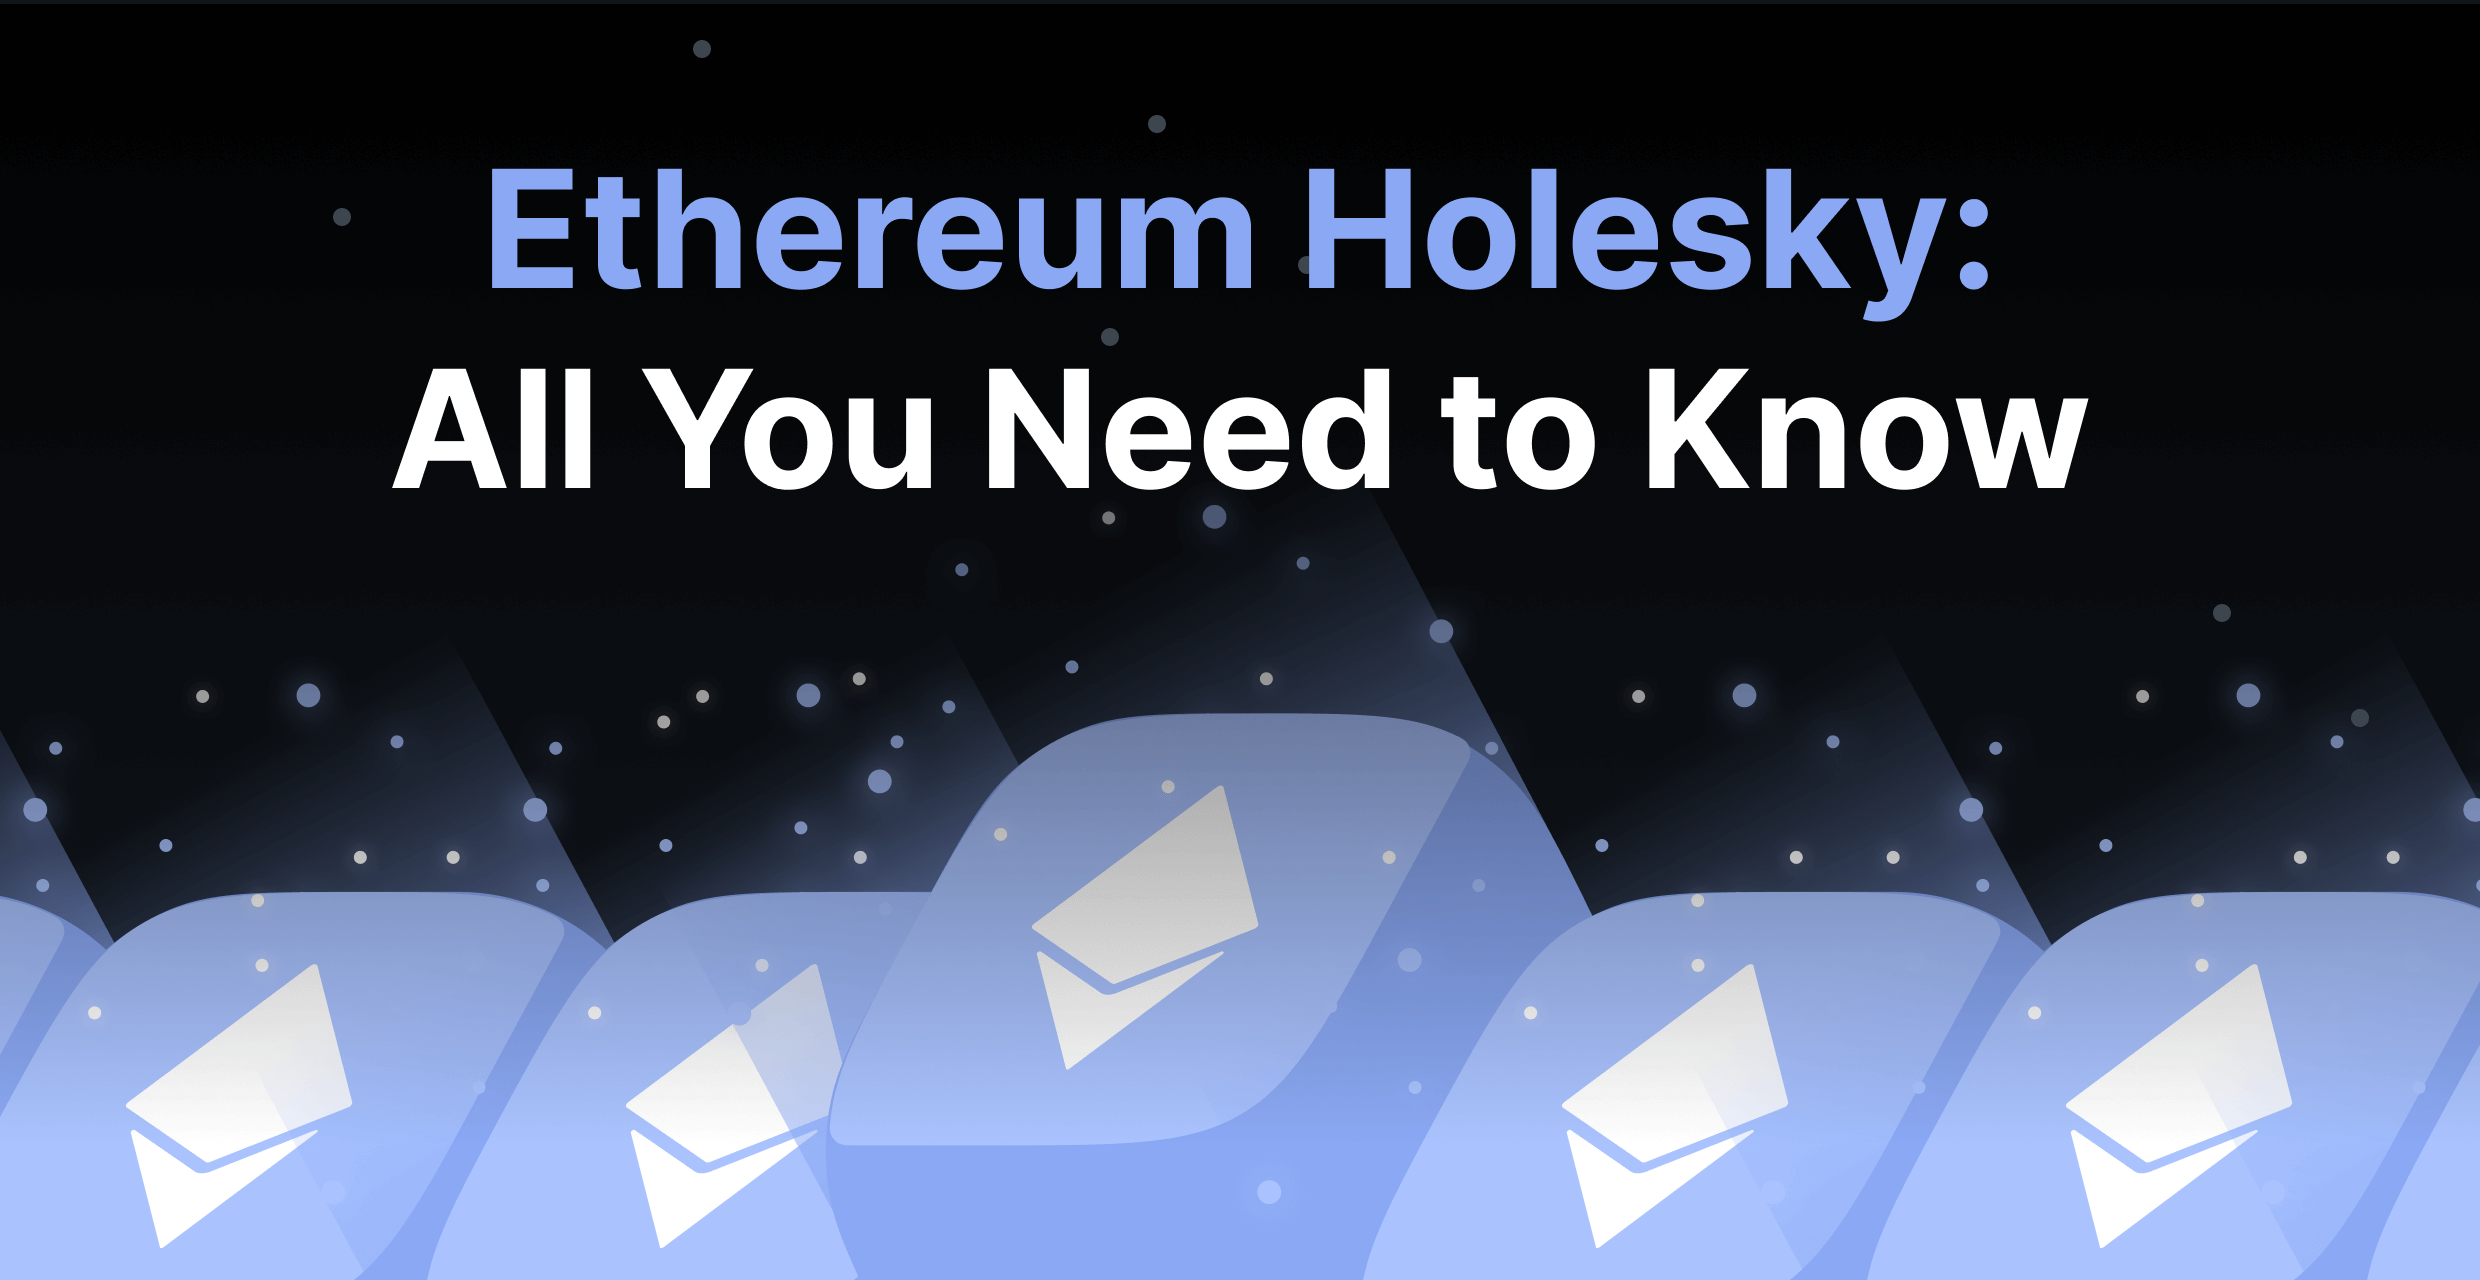 Ethereum Holesky: All You Need to Know and How to Use It